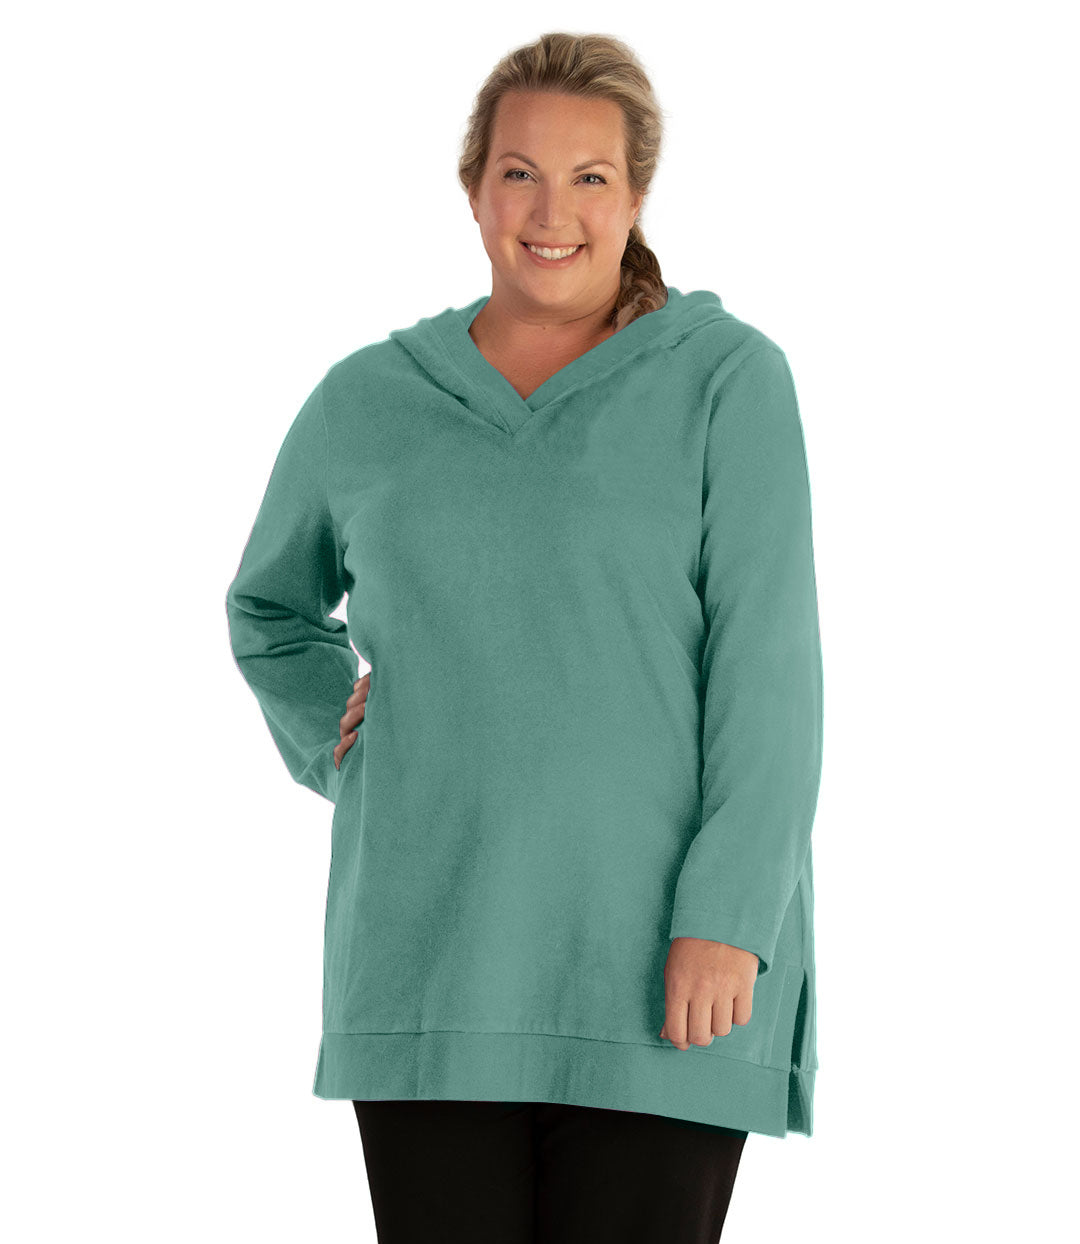 Plus size woman, facing front, wearing JunoActive plus size Legacy Cotton Casual Pullover V-Neck Hoodie in the color Lichen Green. She is wearing JunoActive Plus Size Leggings in the color Black.